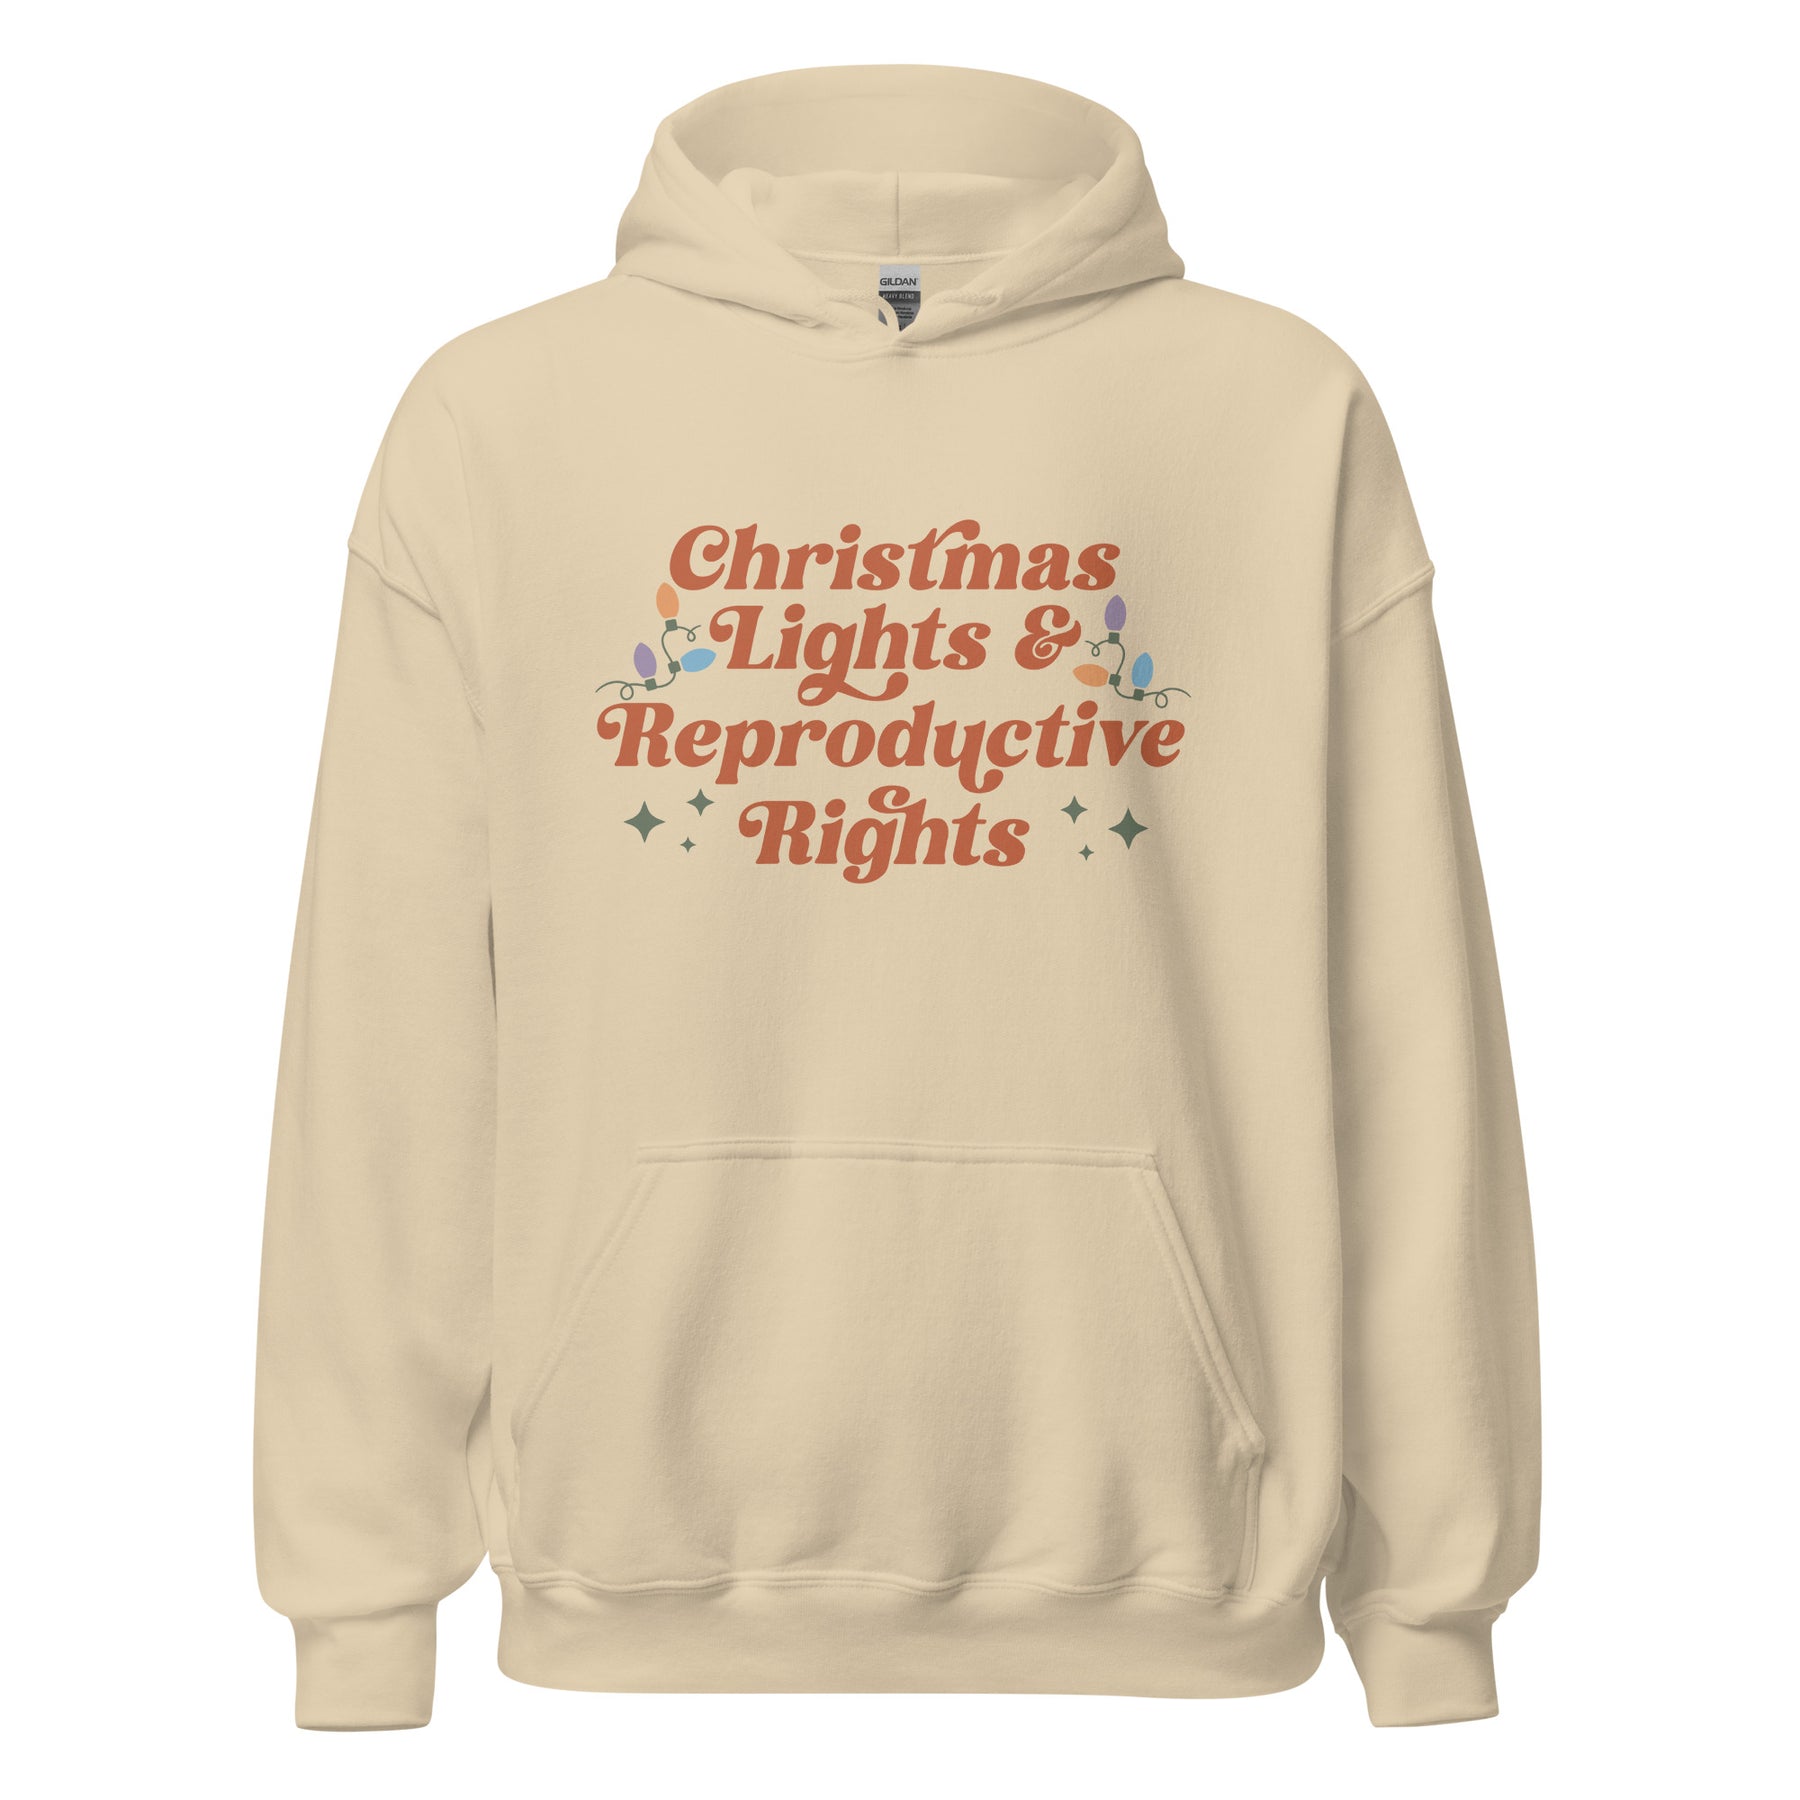 Christmas Lights & Reproductive Rights Hoodie